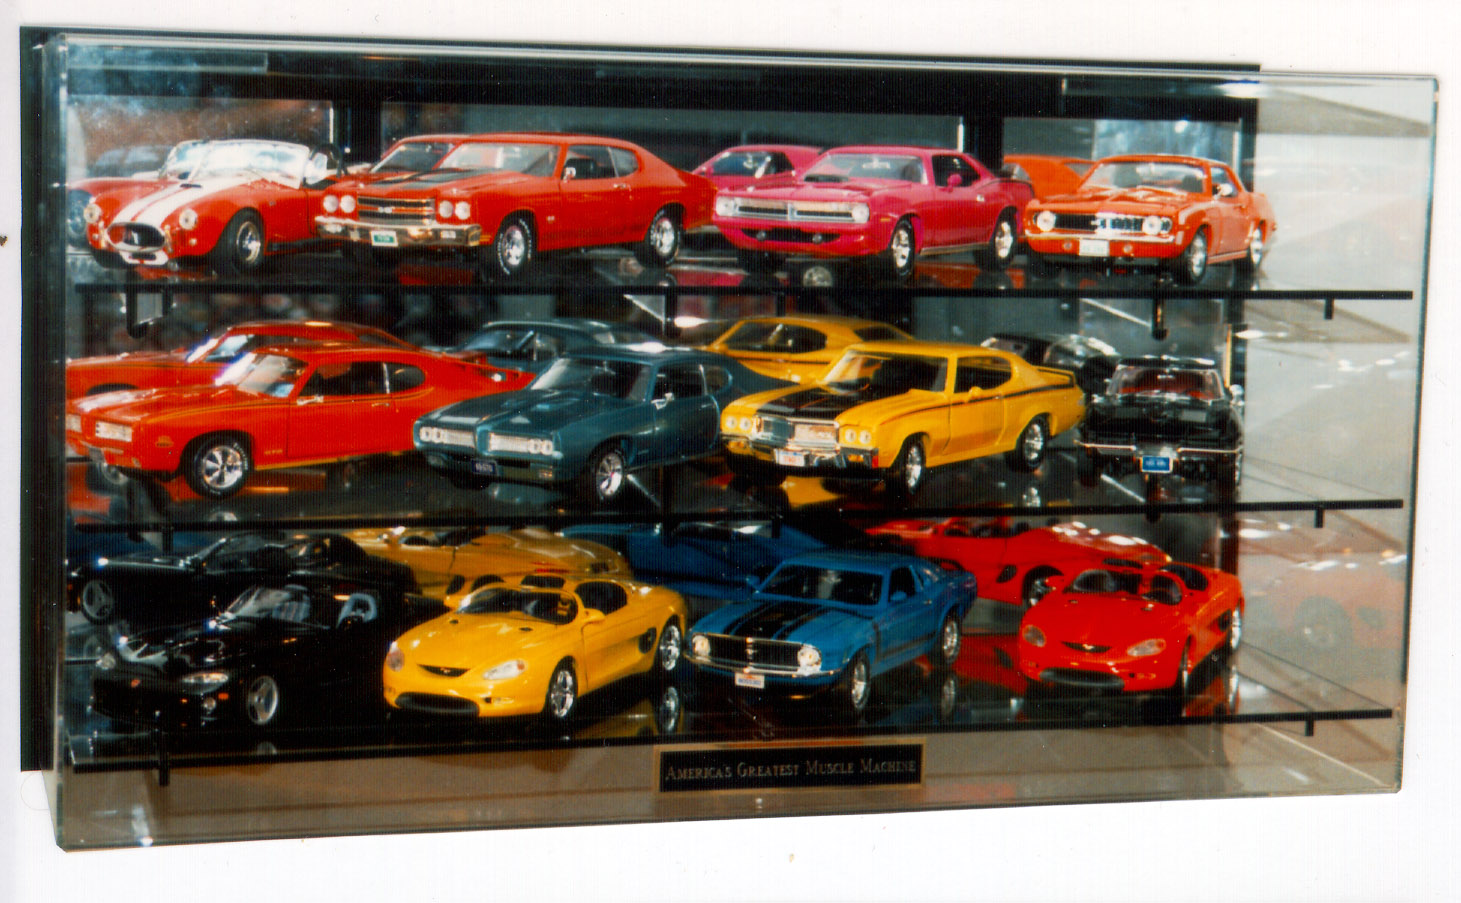 Example of a display case to hold model cars